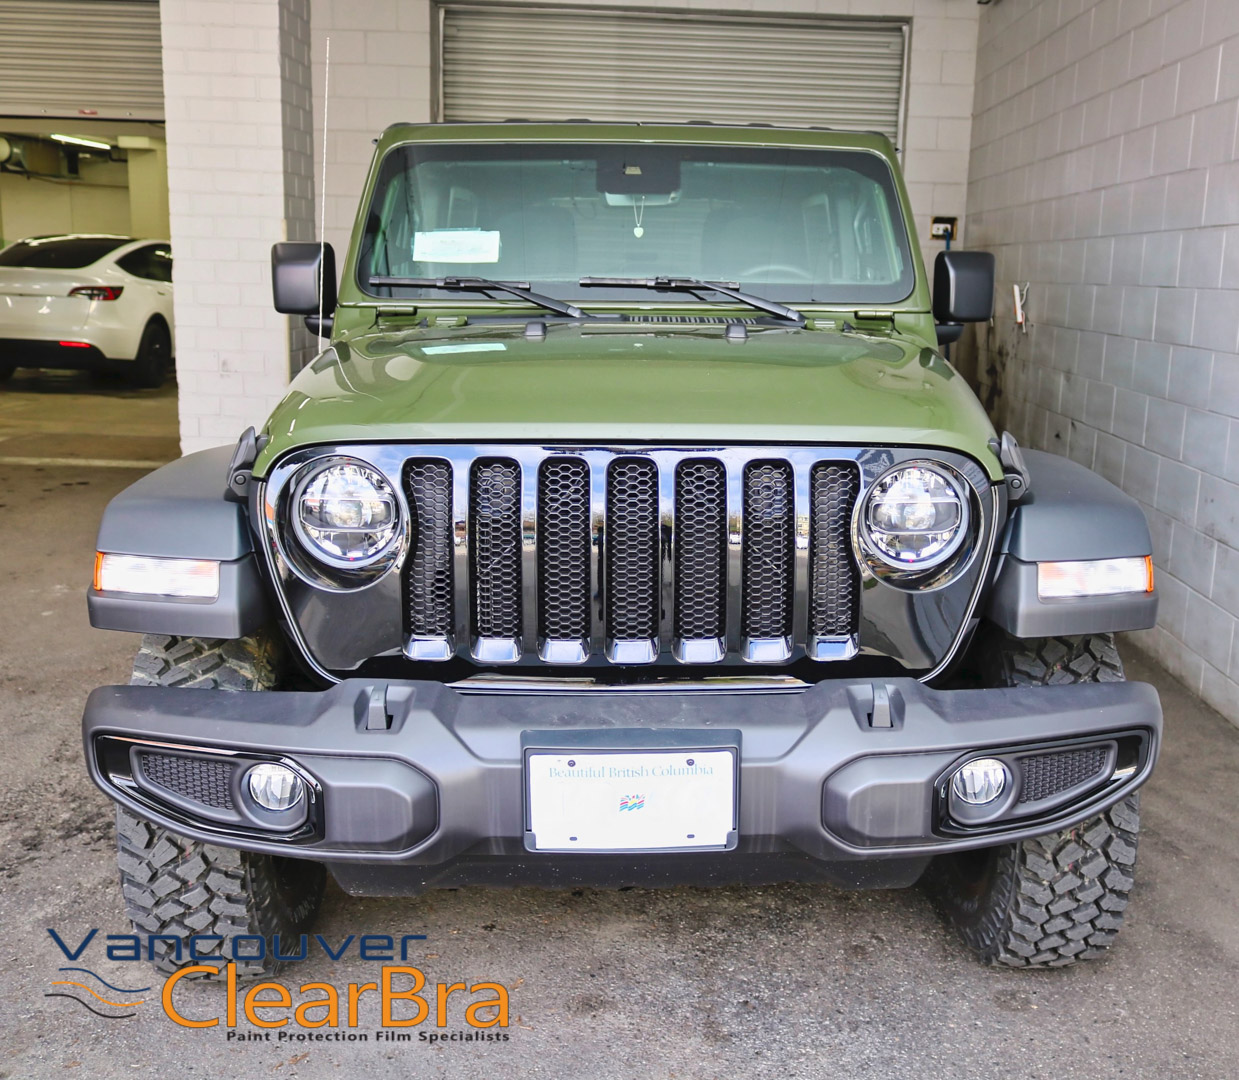 Willys Jeep Wrangler PPF - Vancouver ClearBra